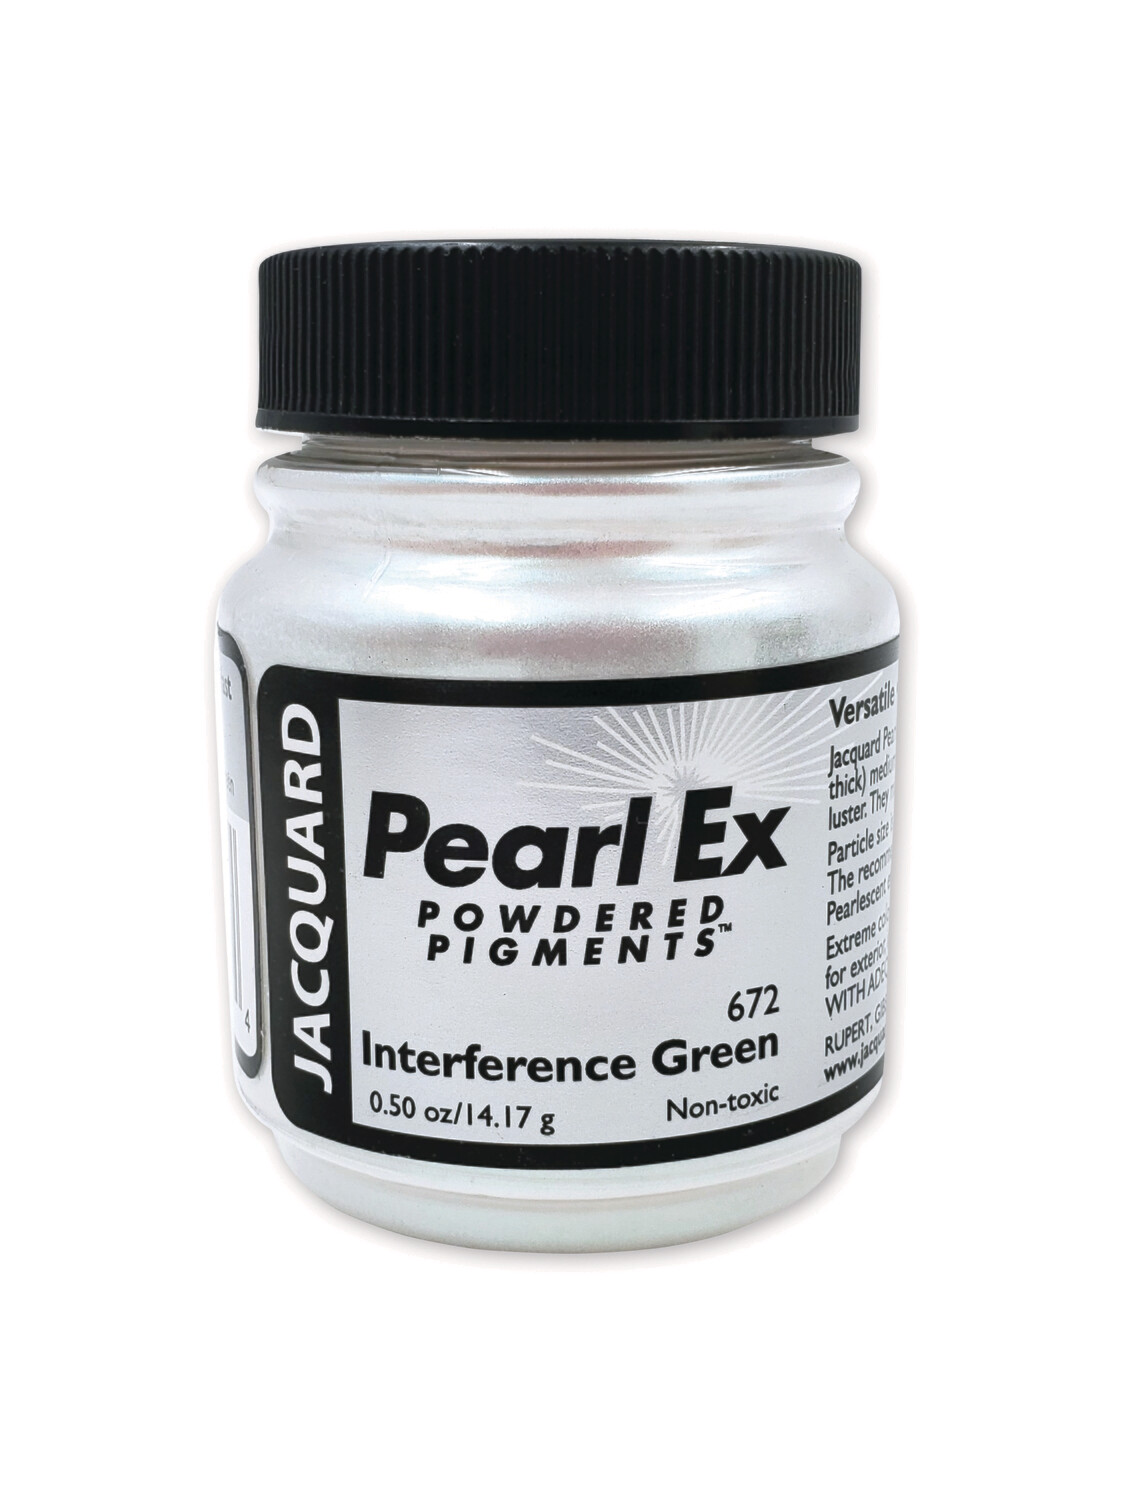 Pearl Ex Powdered Pigments- intereference Green